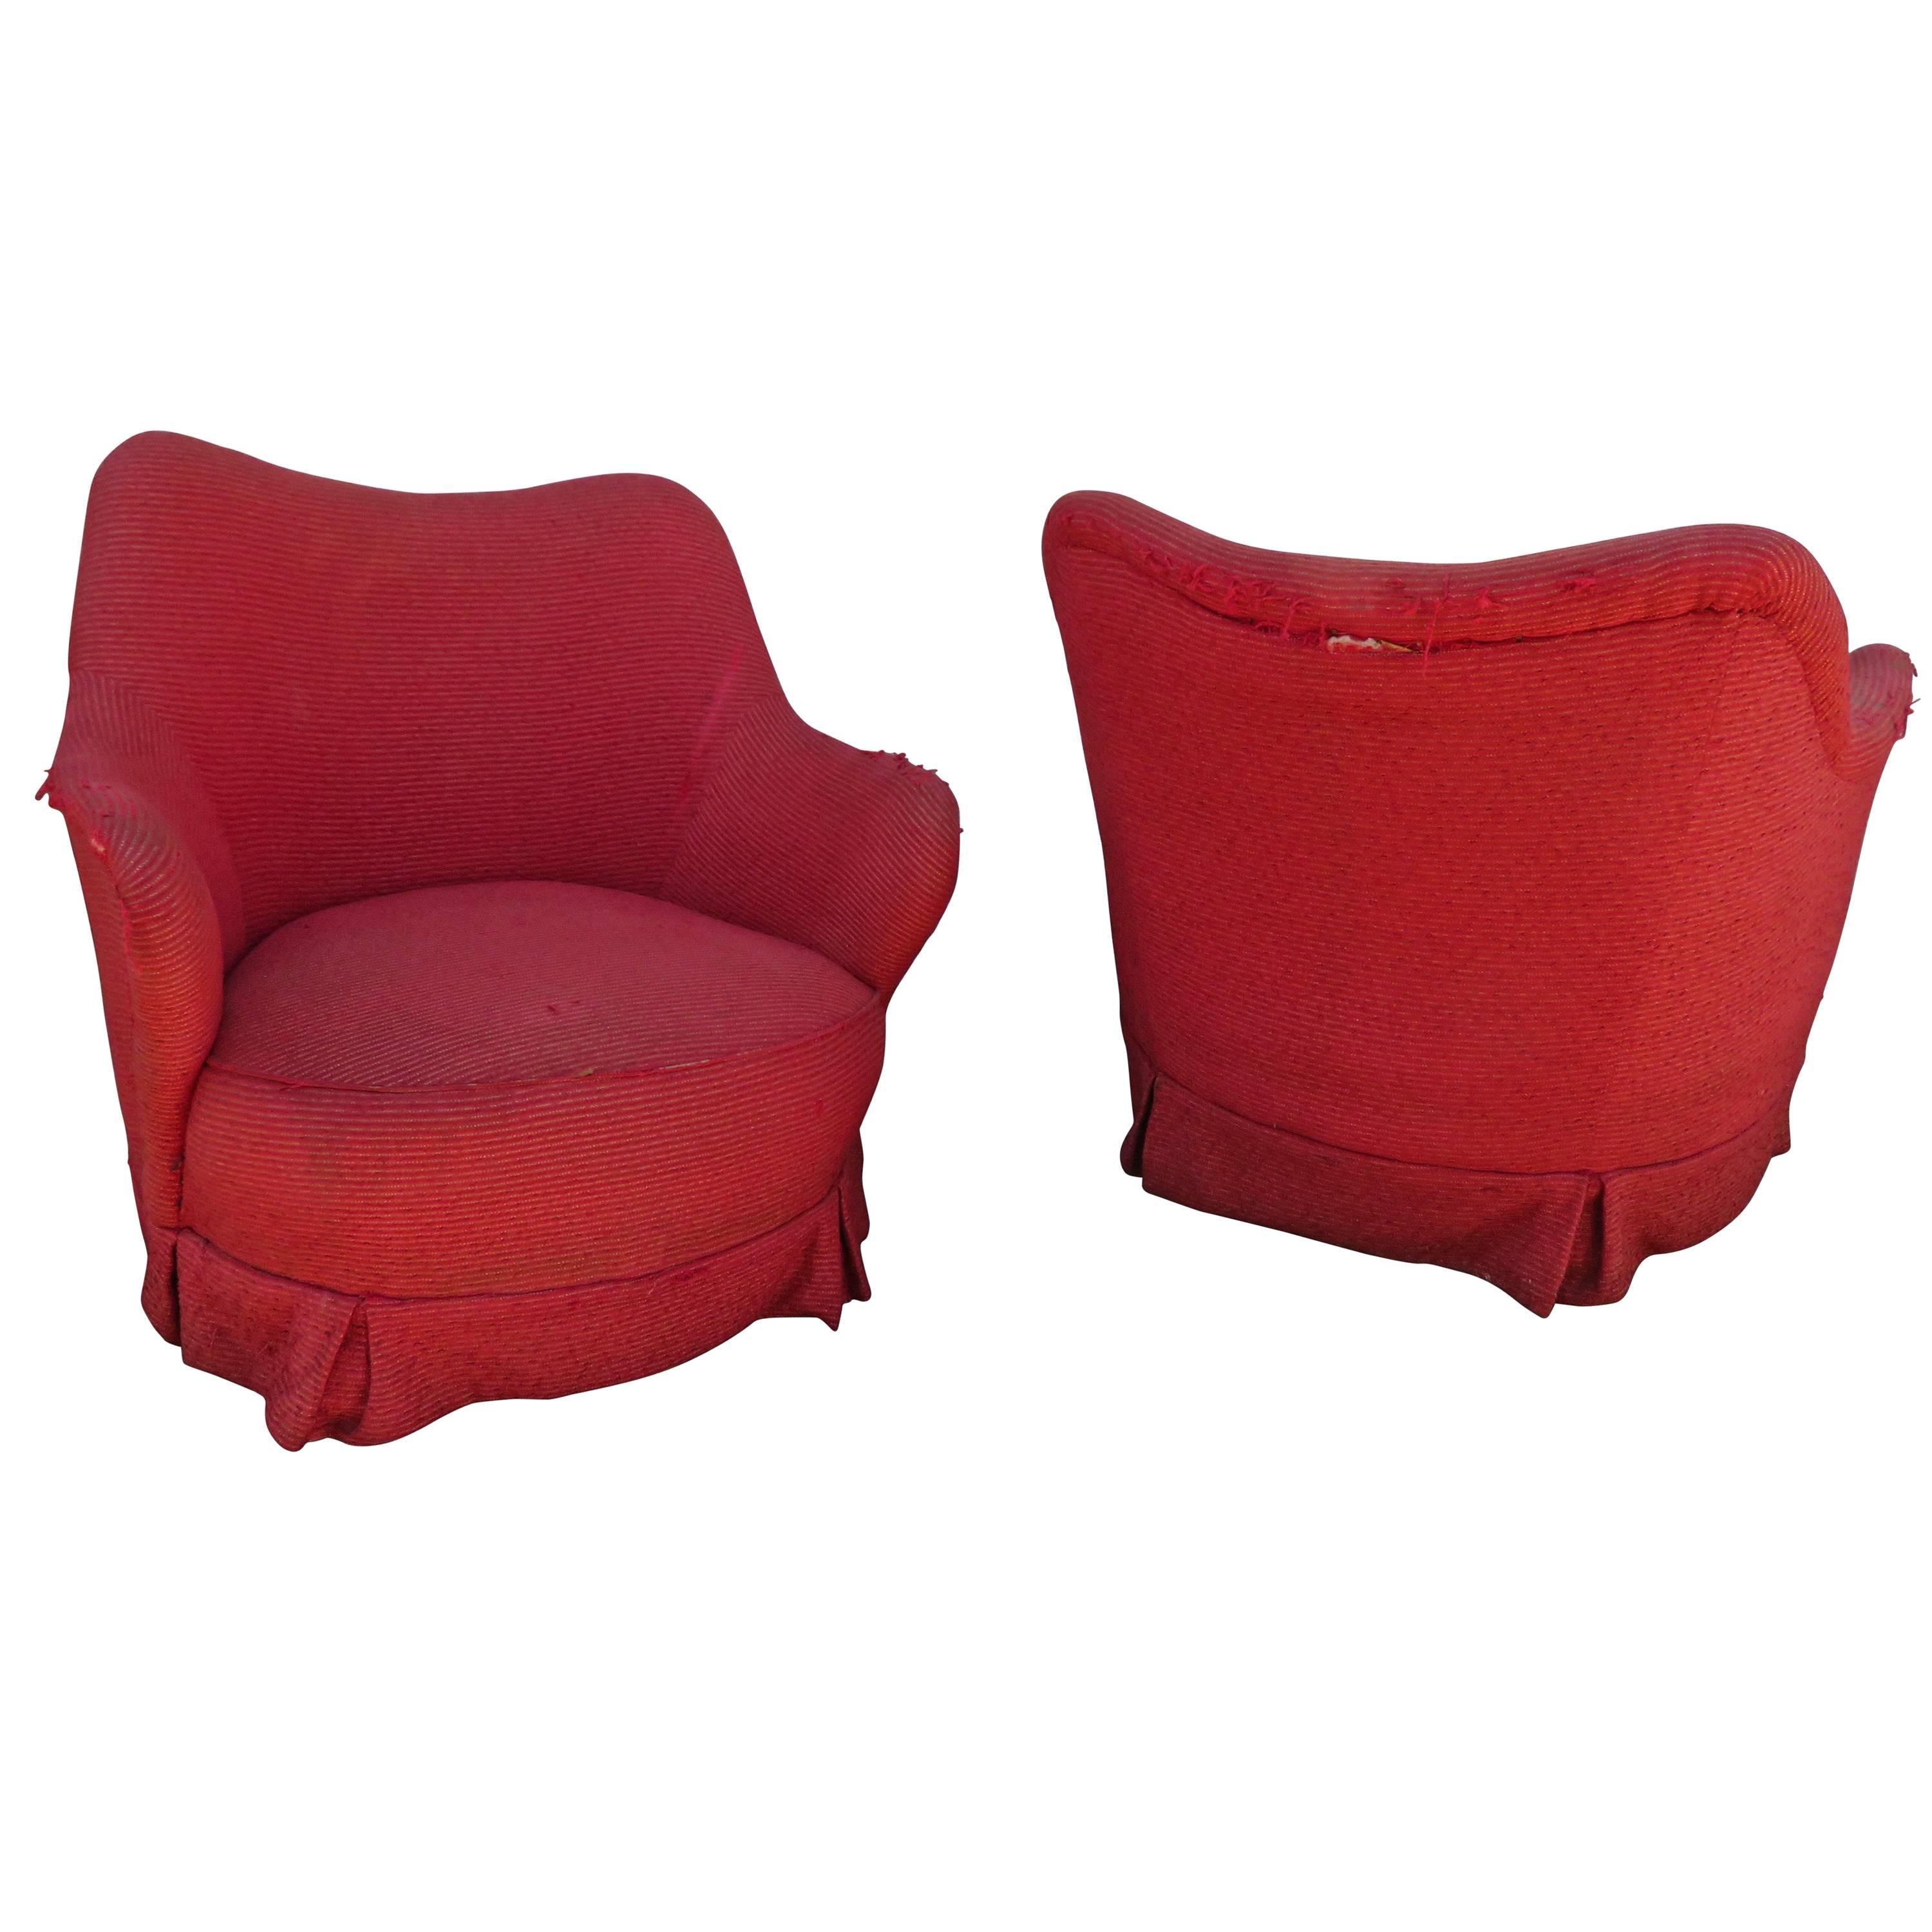 Rolling Barrel Back Lounge Chairs Mid-Century Modern, Pair